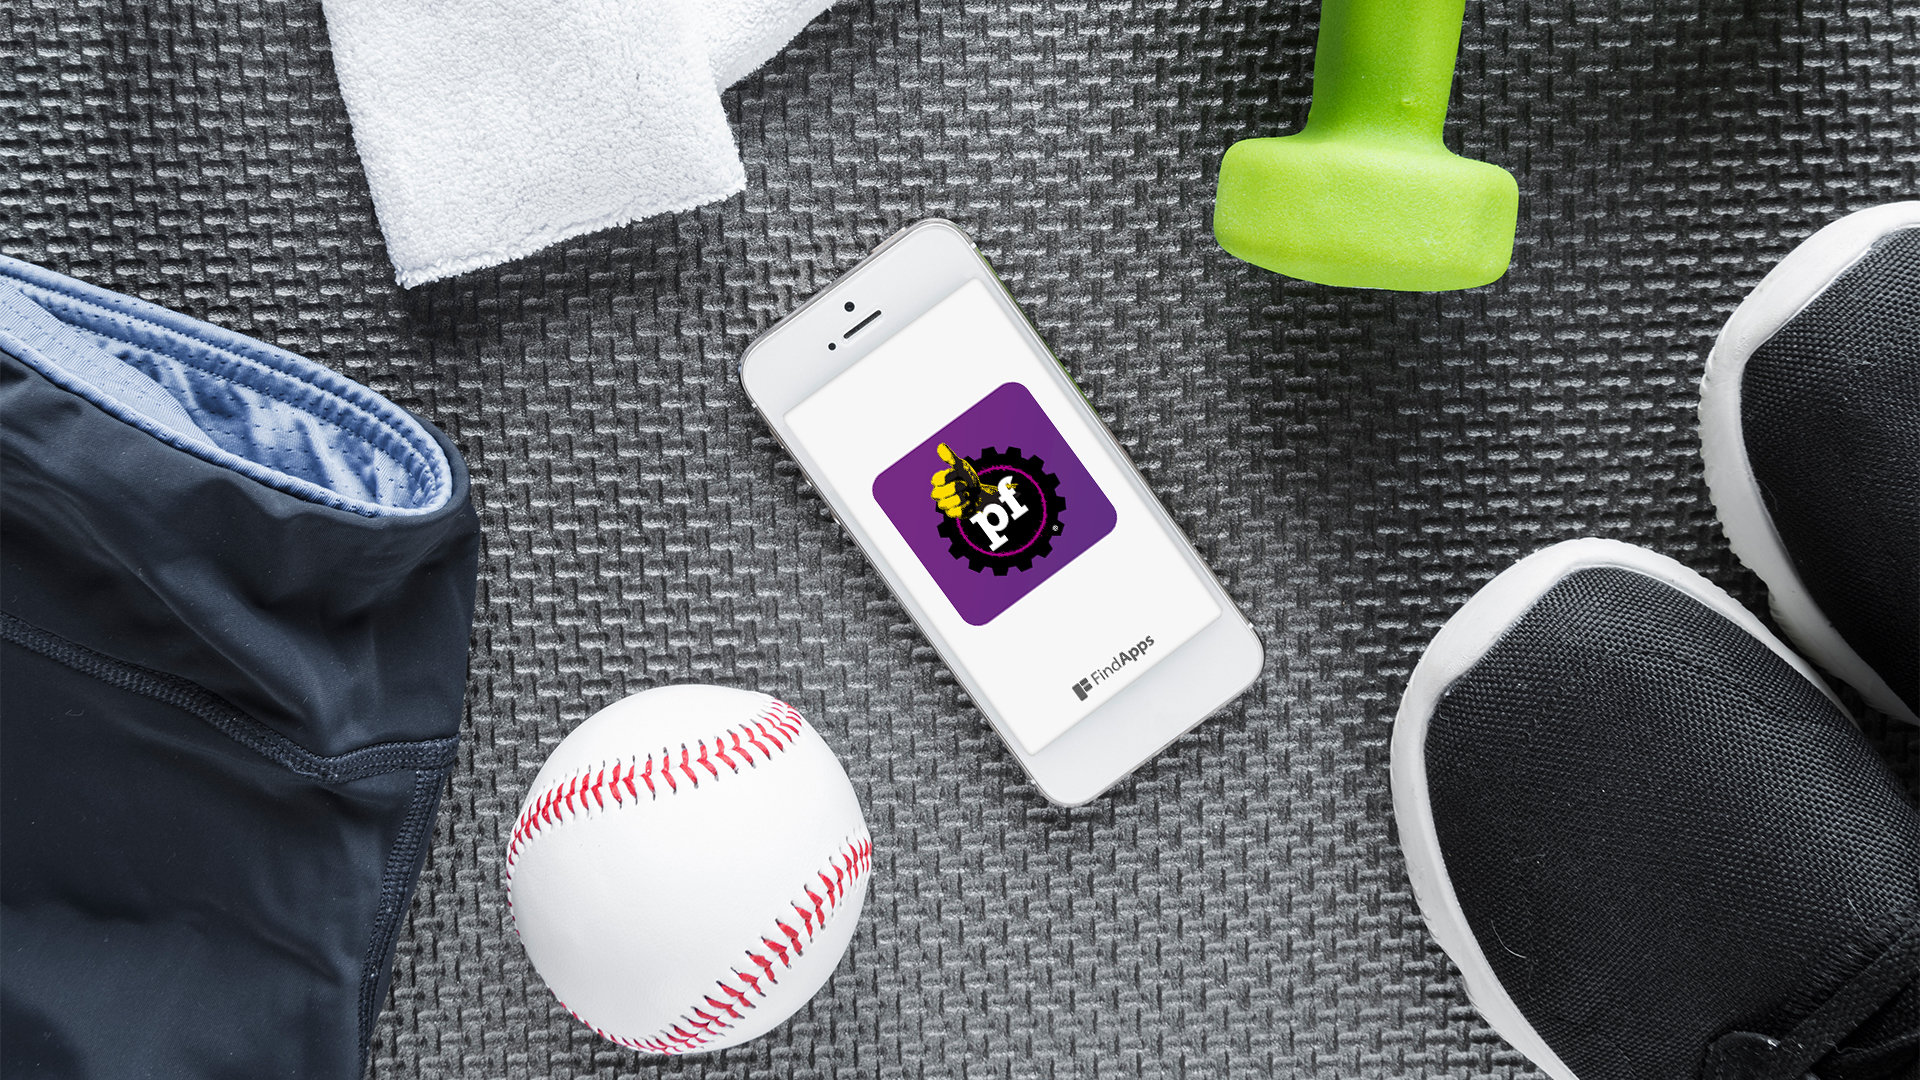 "Planet Fitness Workouts" app, review.